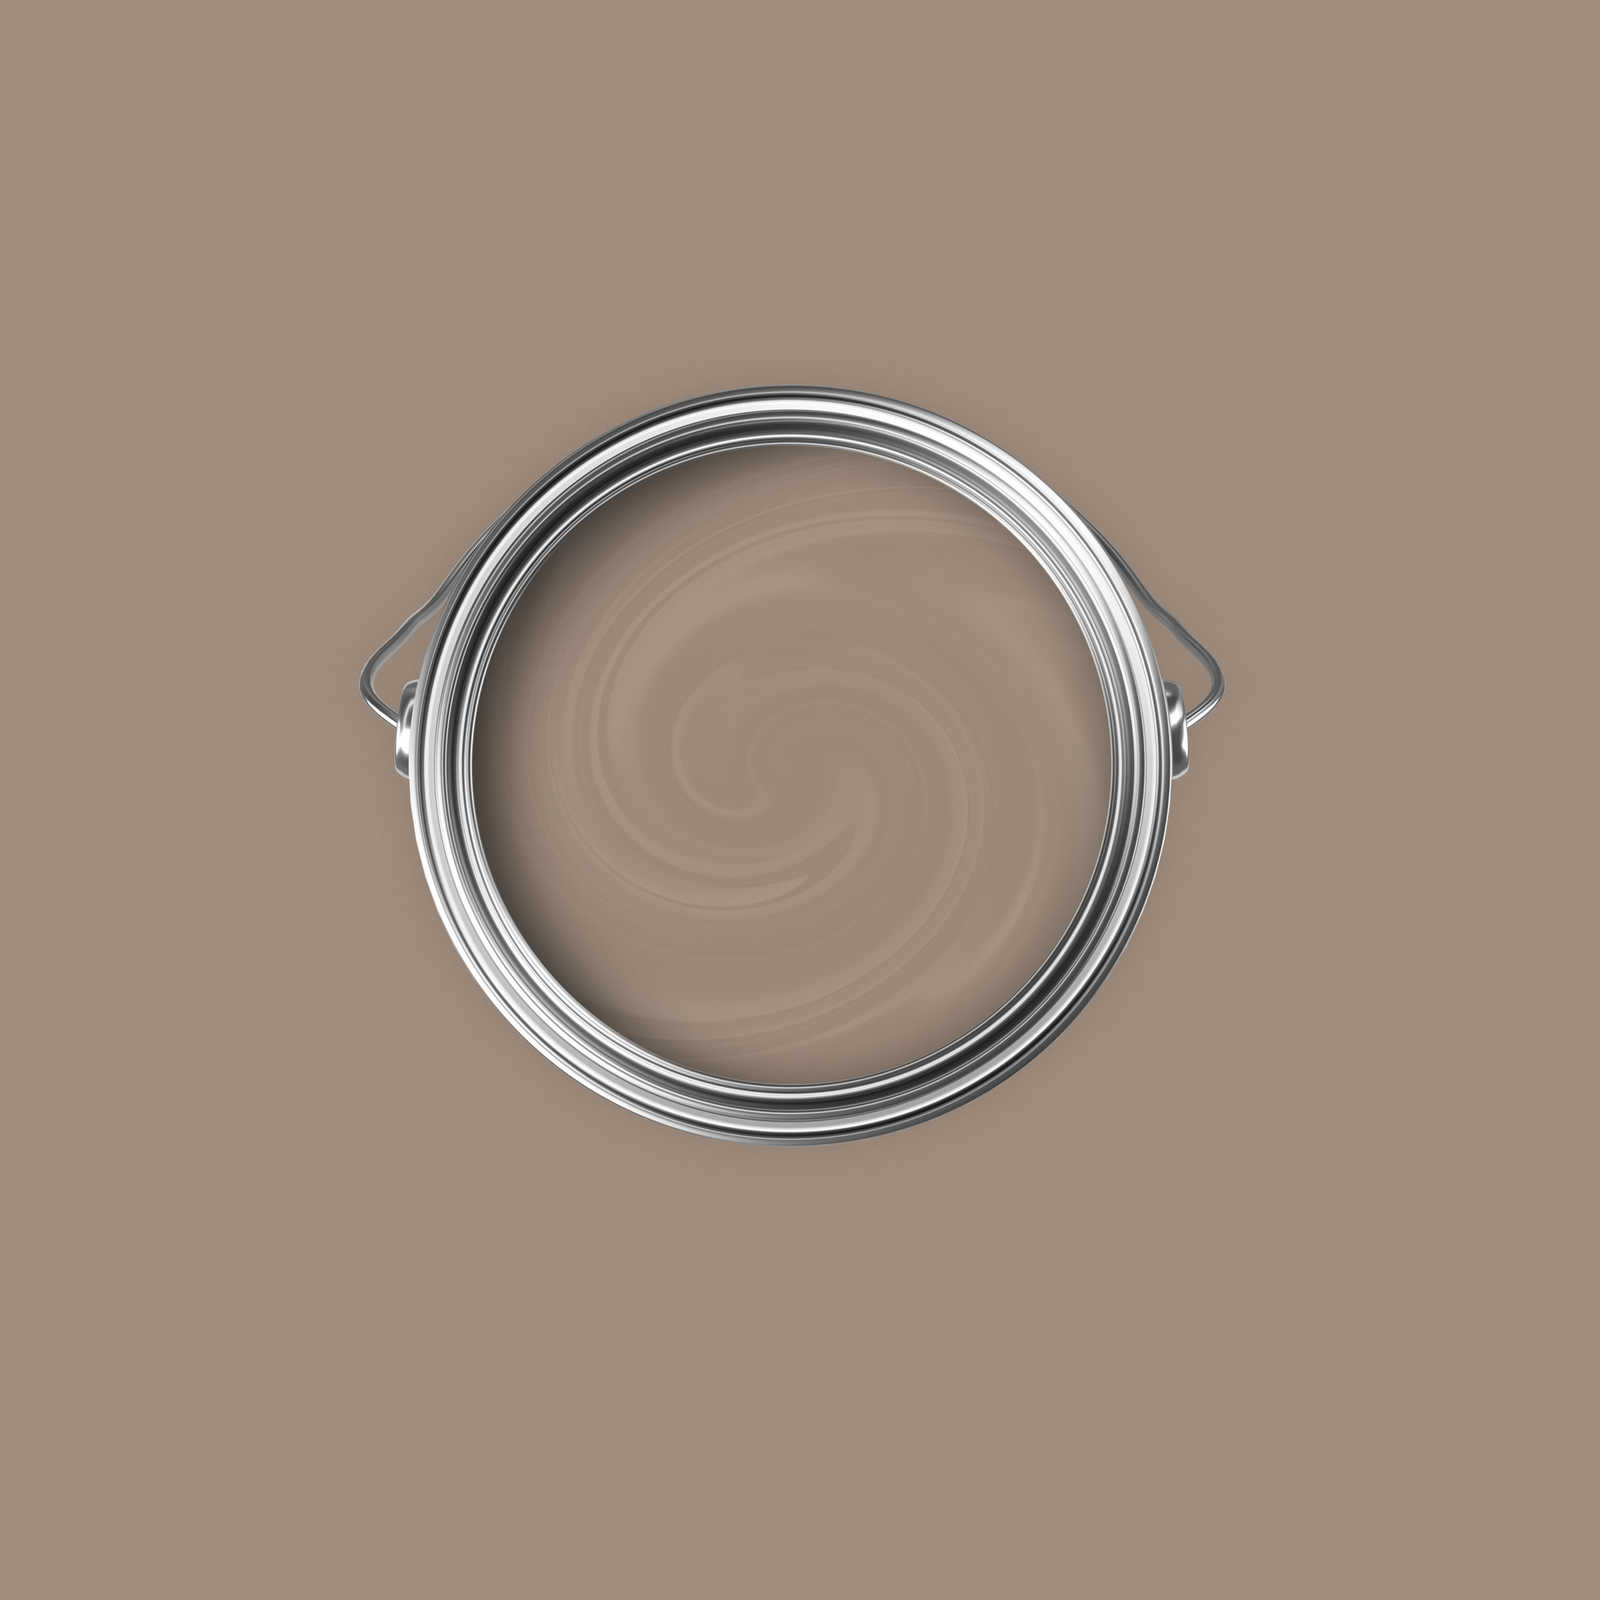             Pittura murale Premium Down-to-earth Taupe »Talented calm taupe« NW702 – 2,5 litri
        